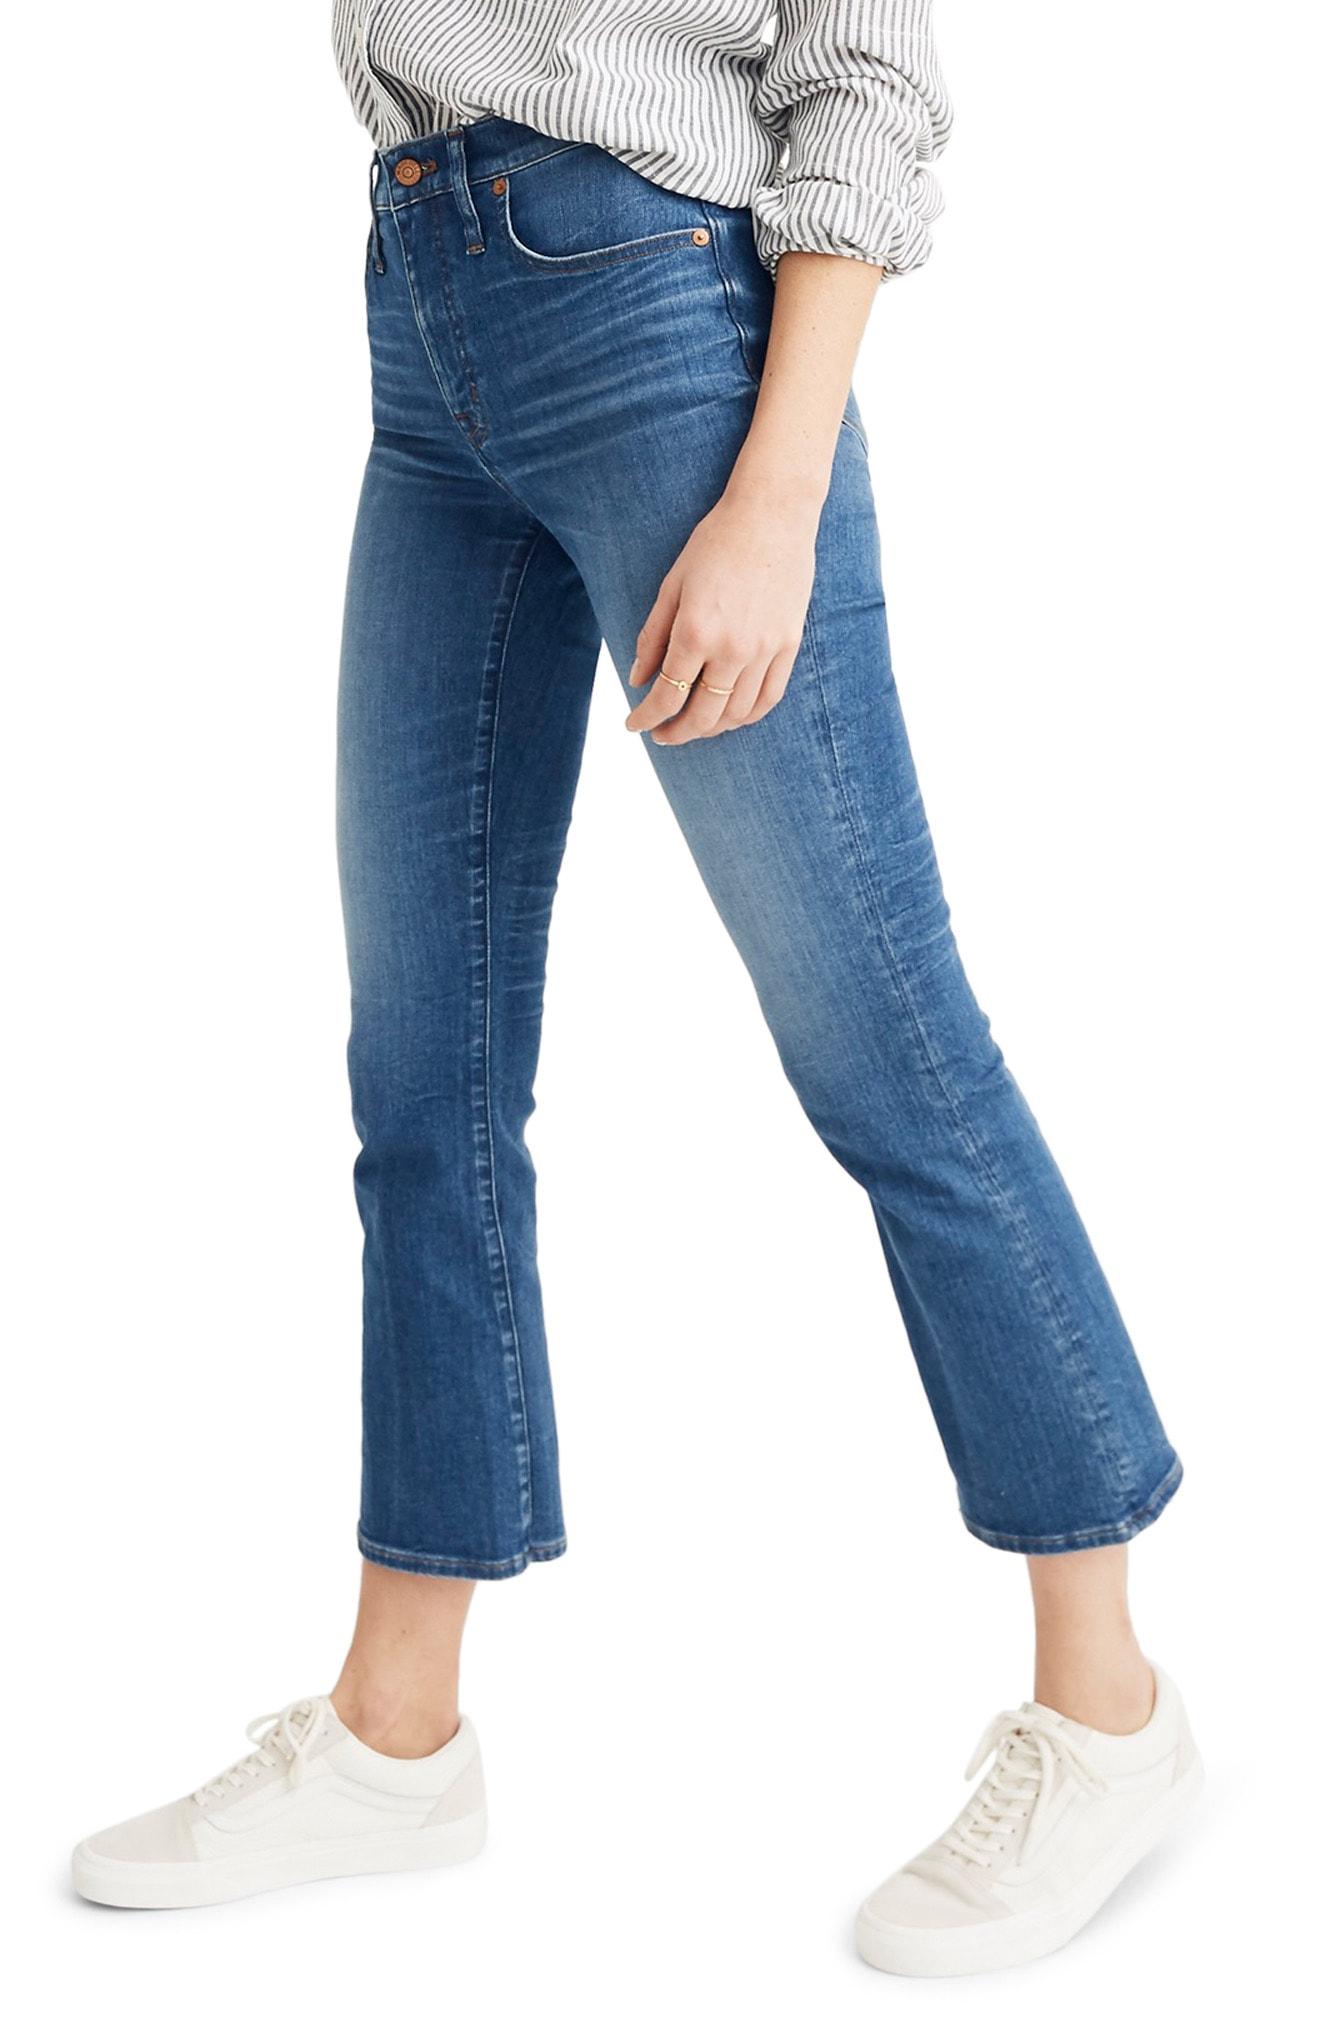 Lyst - Madewell Eco Edition Cali Demi Boot Jeans in Blue